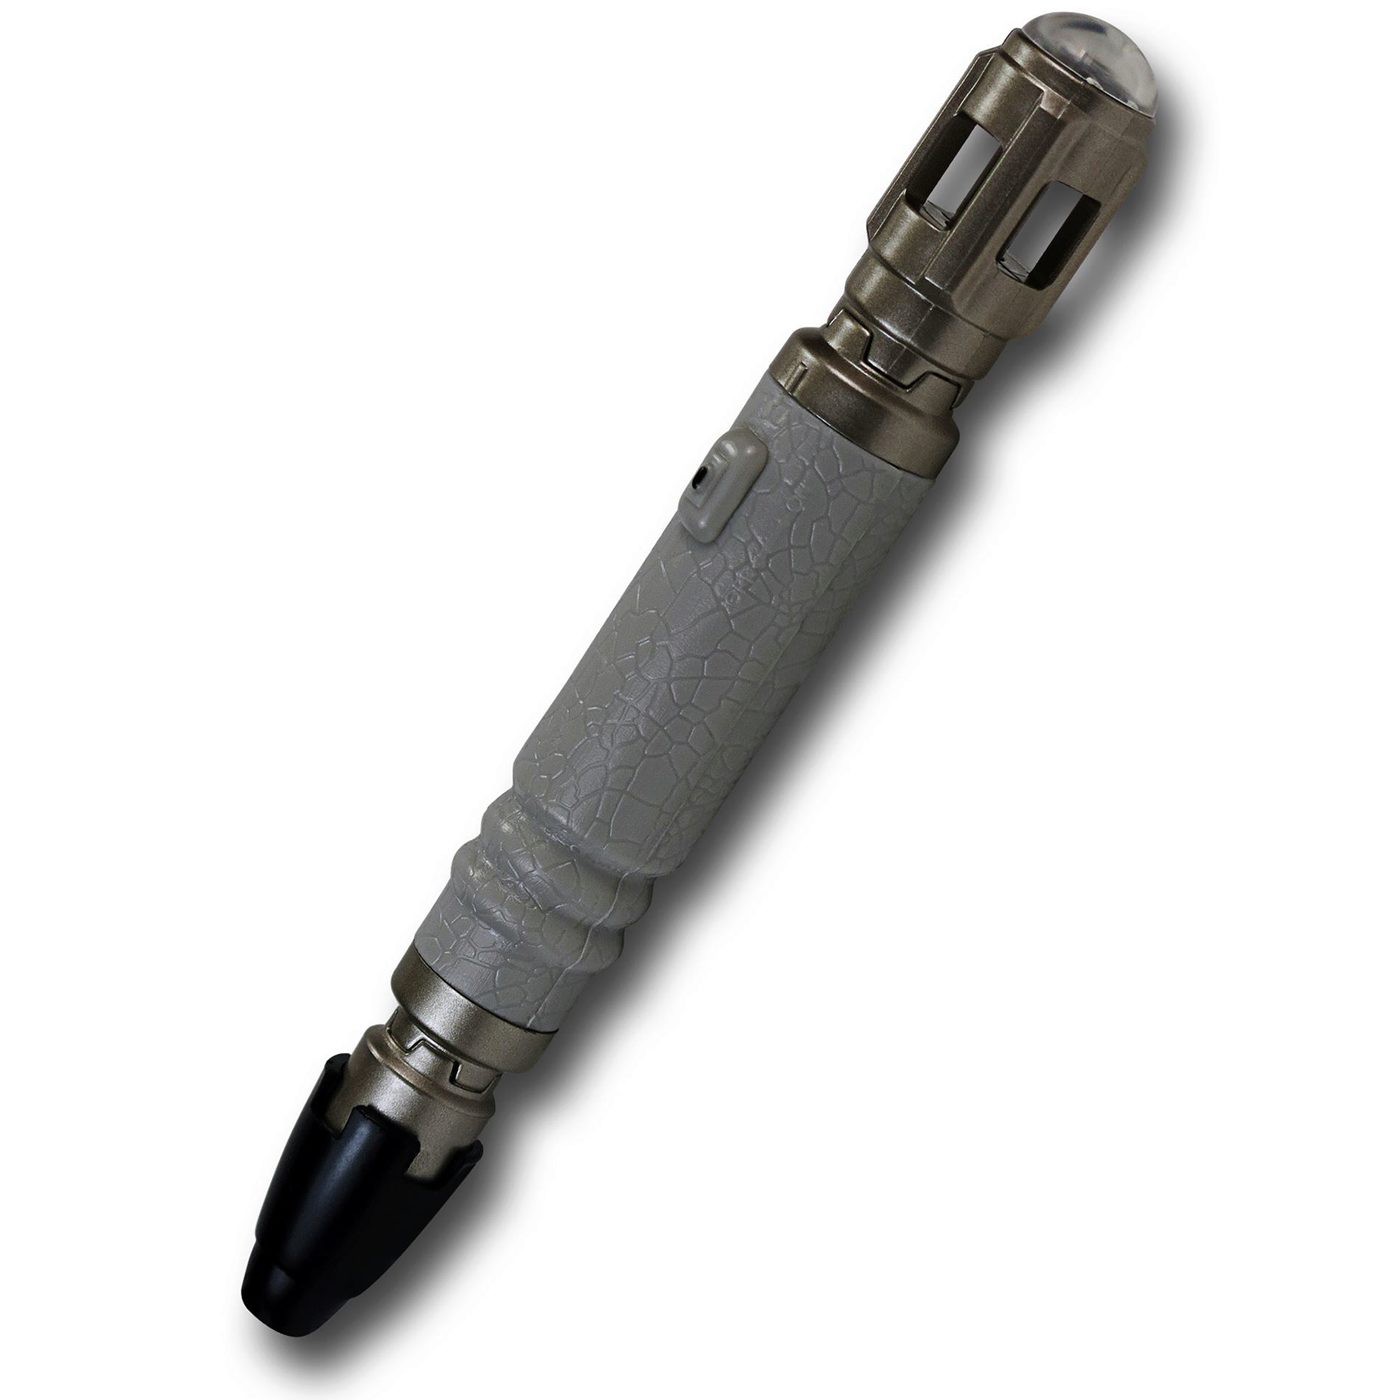 Doctor Who 10th Doctor Sonic Screwdriver LED Flashlight